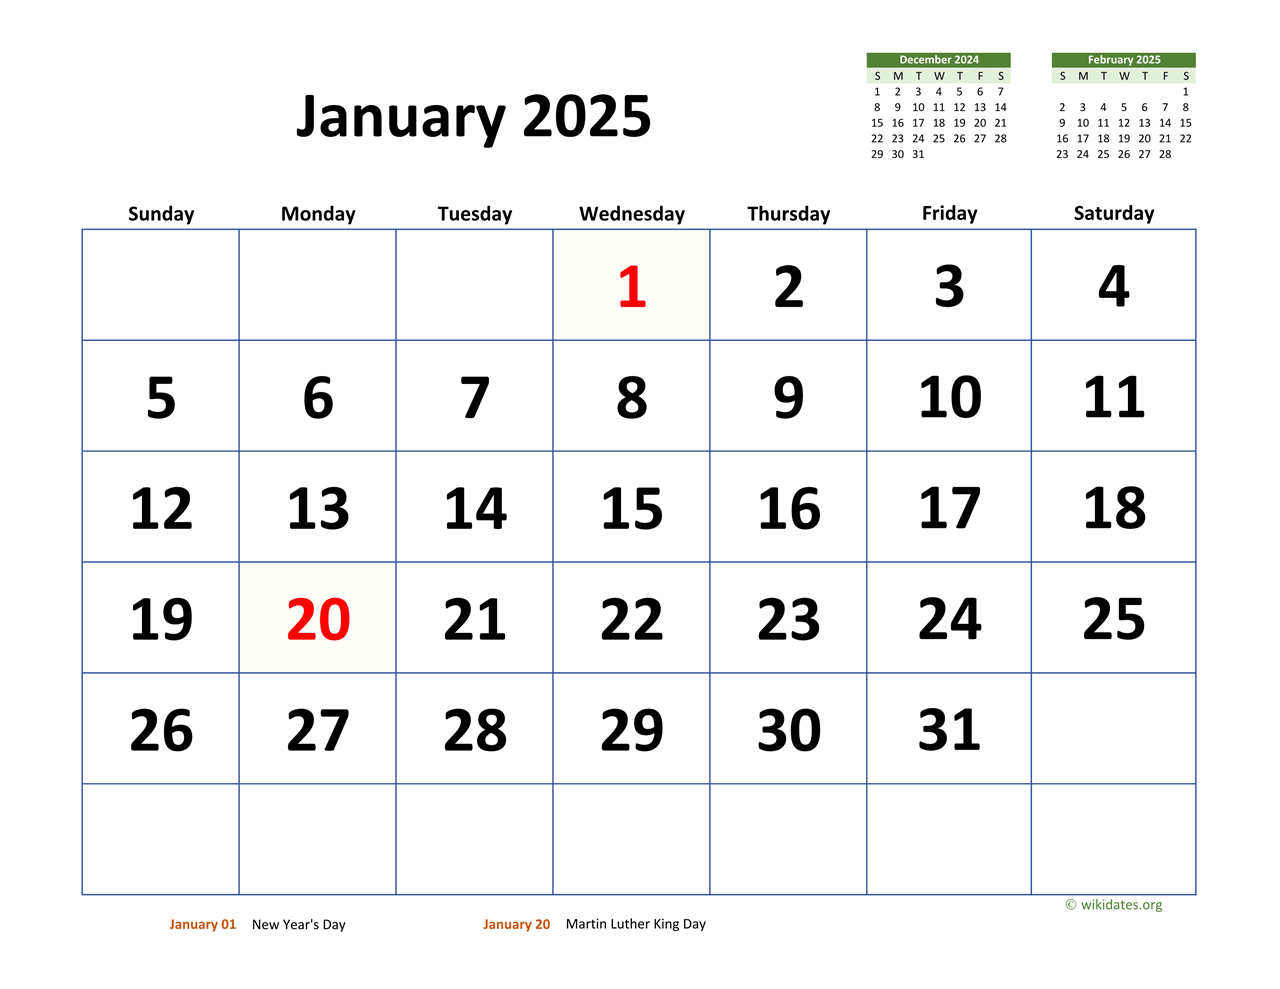 January 2025 Calendar with Extralarge Dates